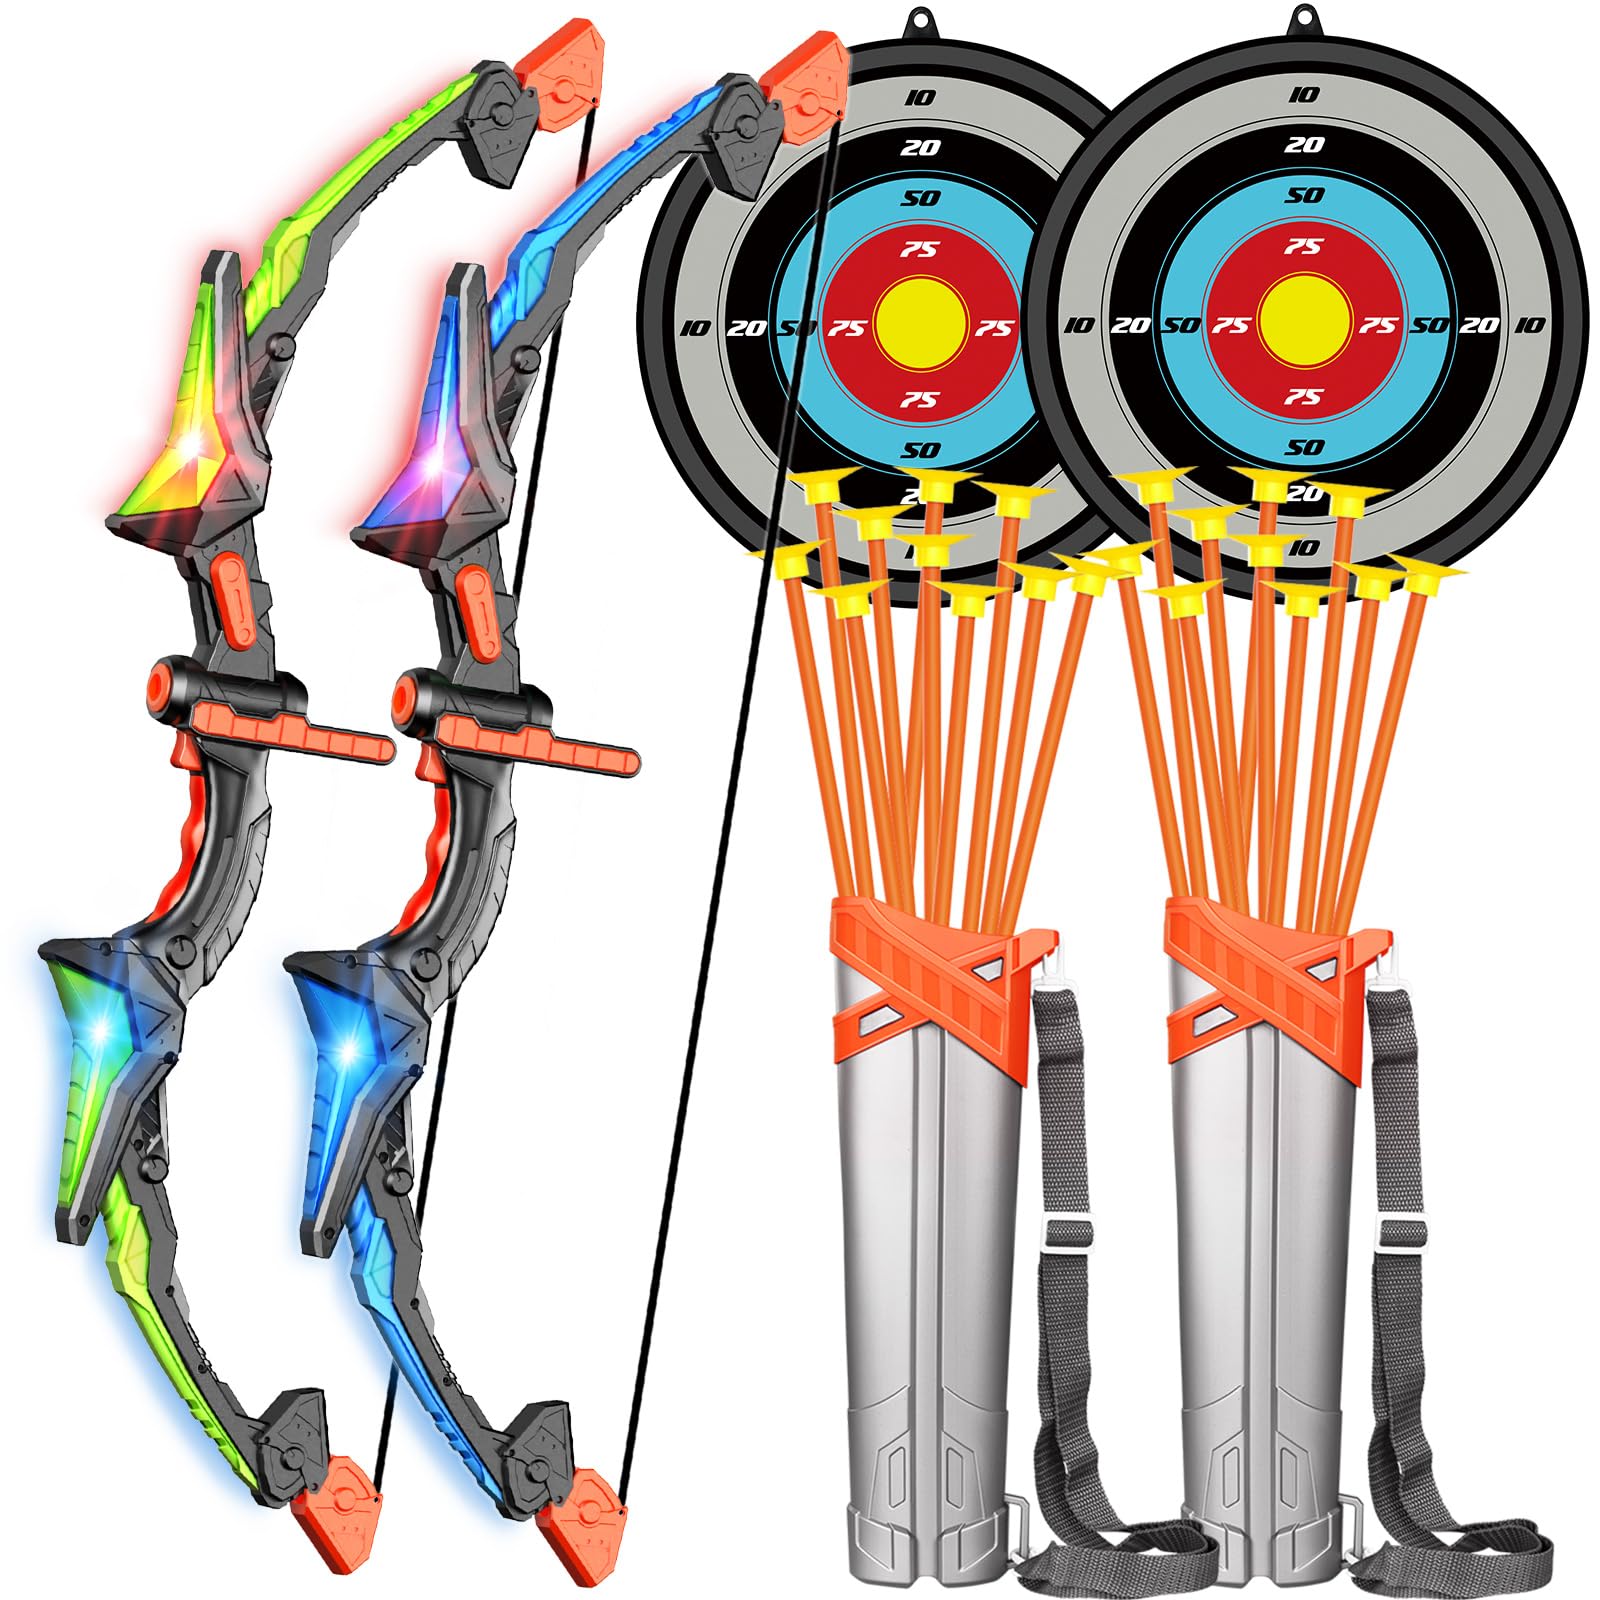 Bigdream Detachable Kids Bow and Arrow Toy 2 Sets, LED Light Up Archery Toys with Suction Cups Arrows, Outdoor Indoor Shooting Games Toys for Boys Grils Birthday Gifts